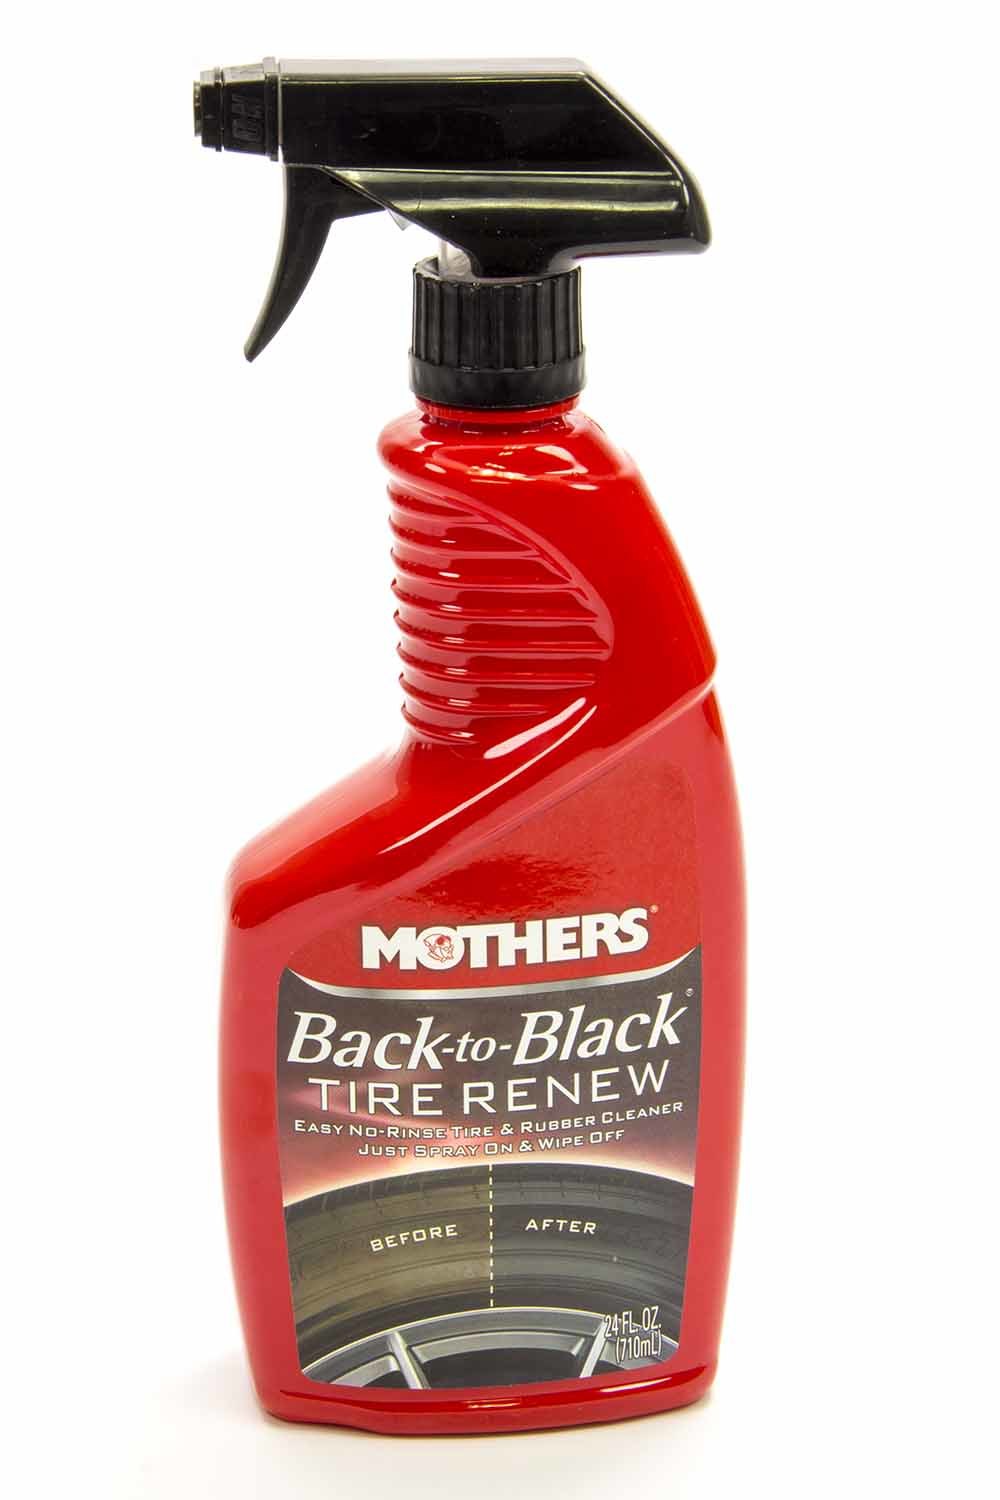 MOTHERS Tire Cleaner, Back to Black Tire Renew, 24 oz Spray Bottle, Each